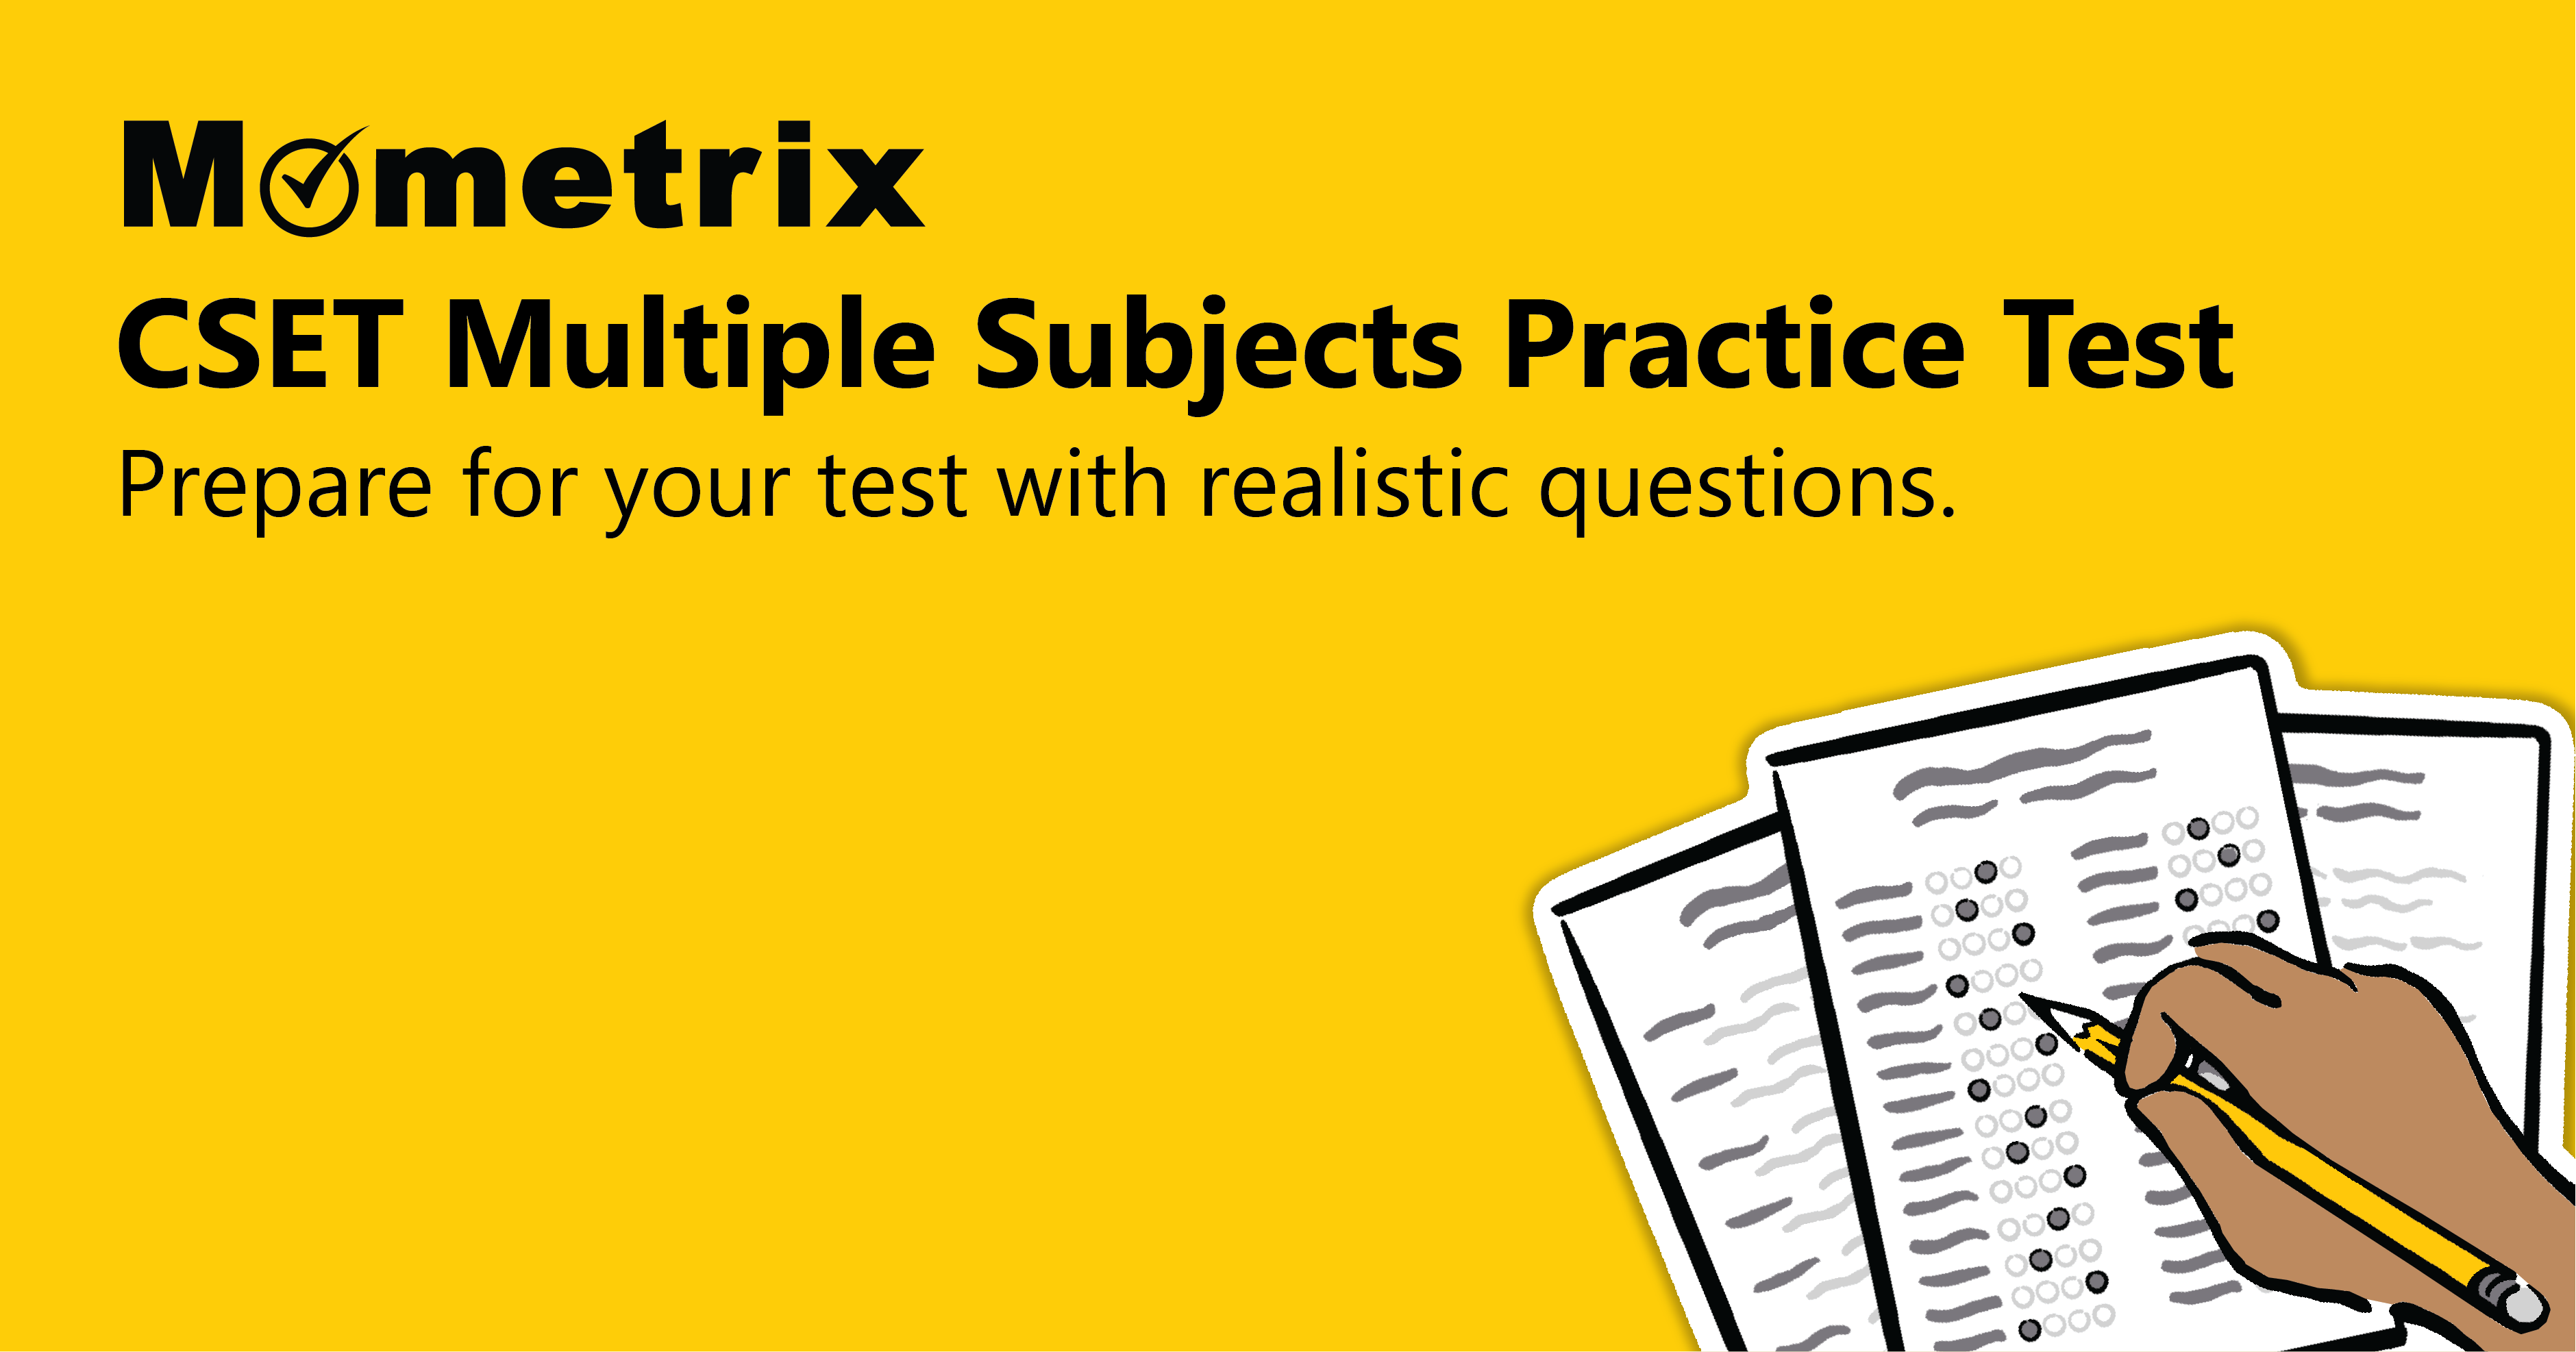 Mometrix CSET Multiple Subjects Practice Test advertisement. Text reads: "Prepare for your test with realistic questions." An illustration shows a hand marking answers on a test paper.